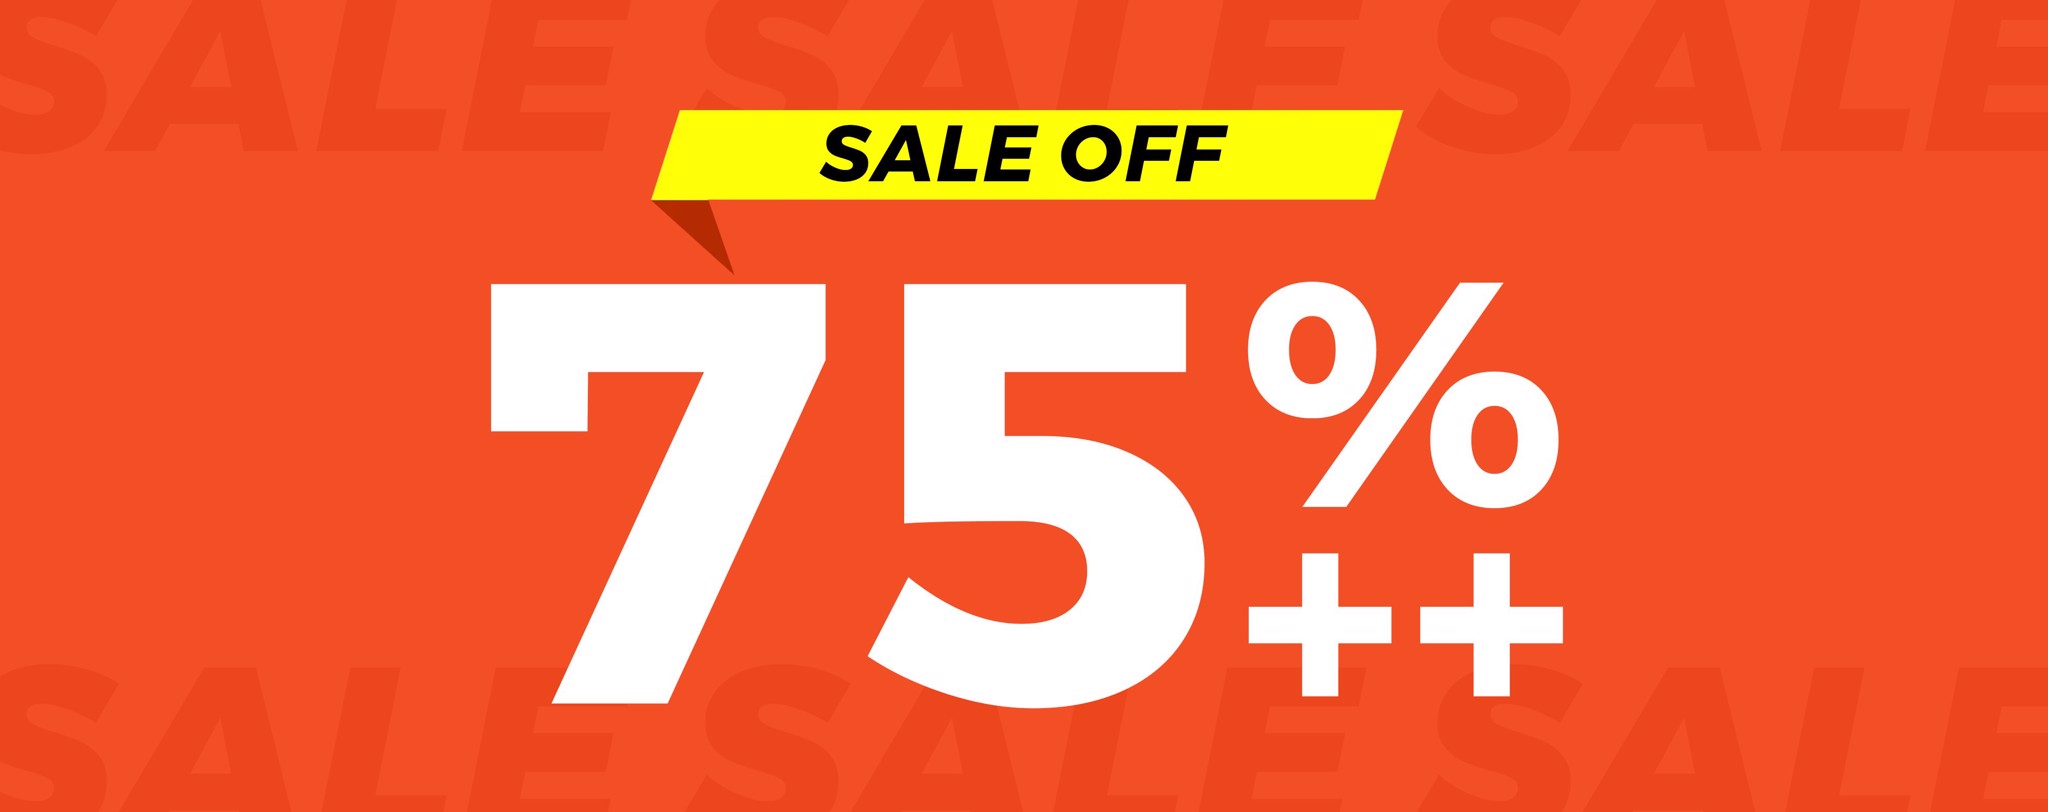 SALE UP TO 75%